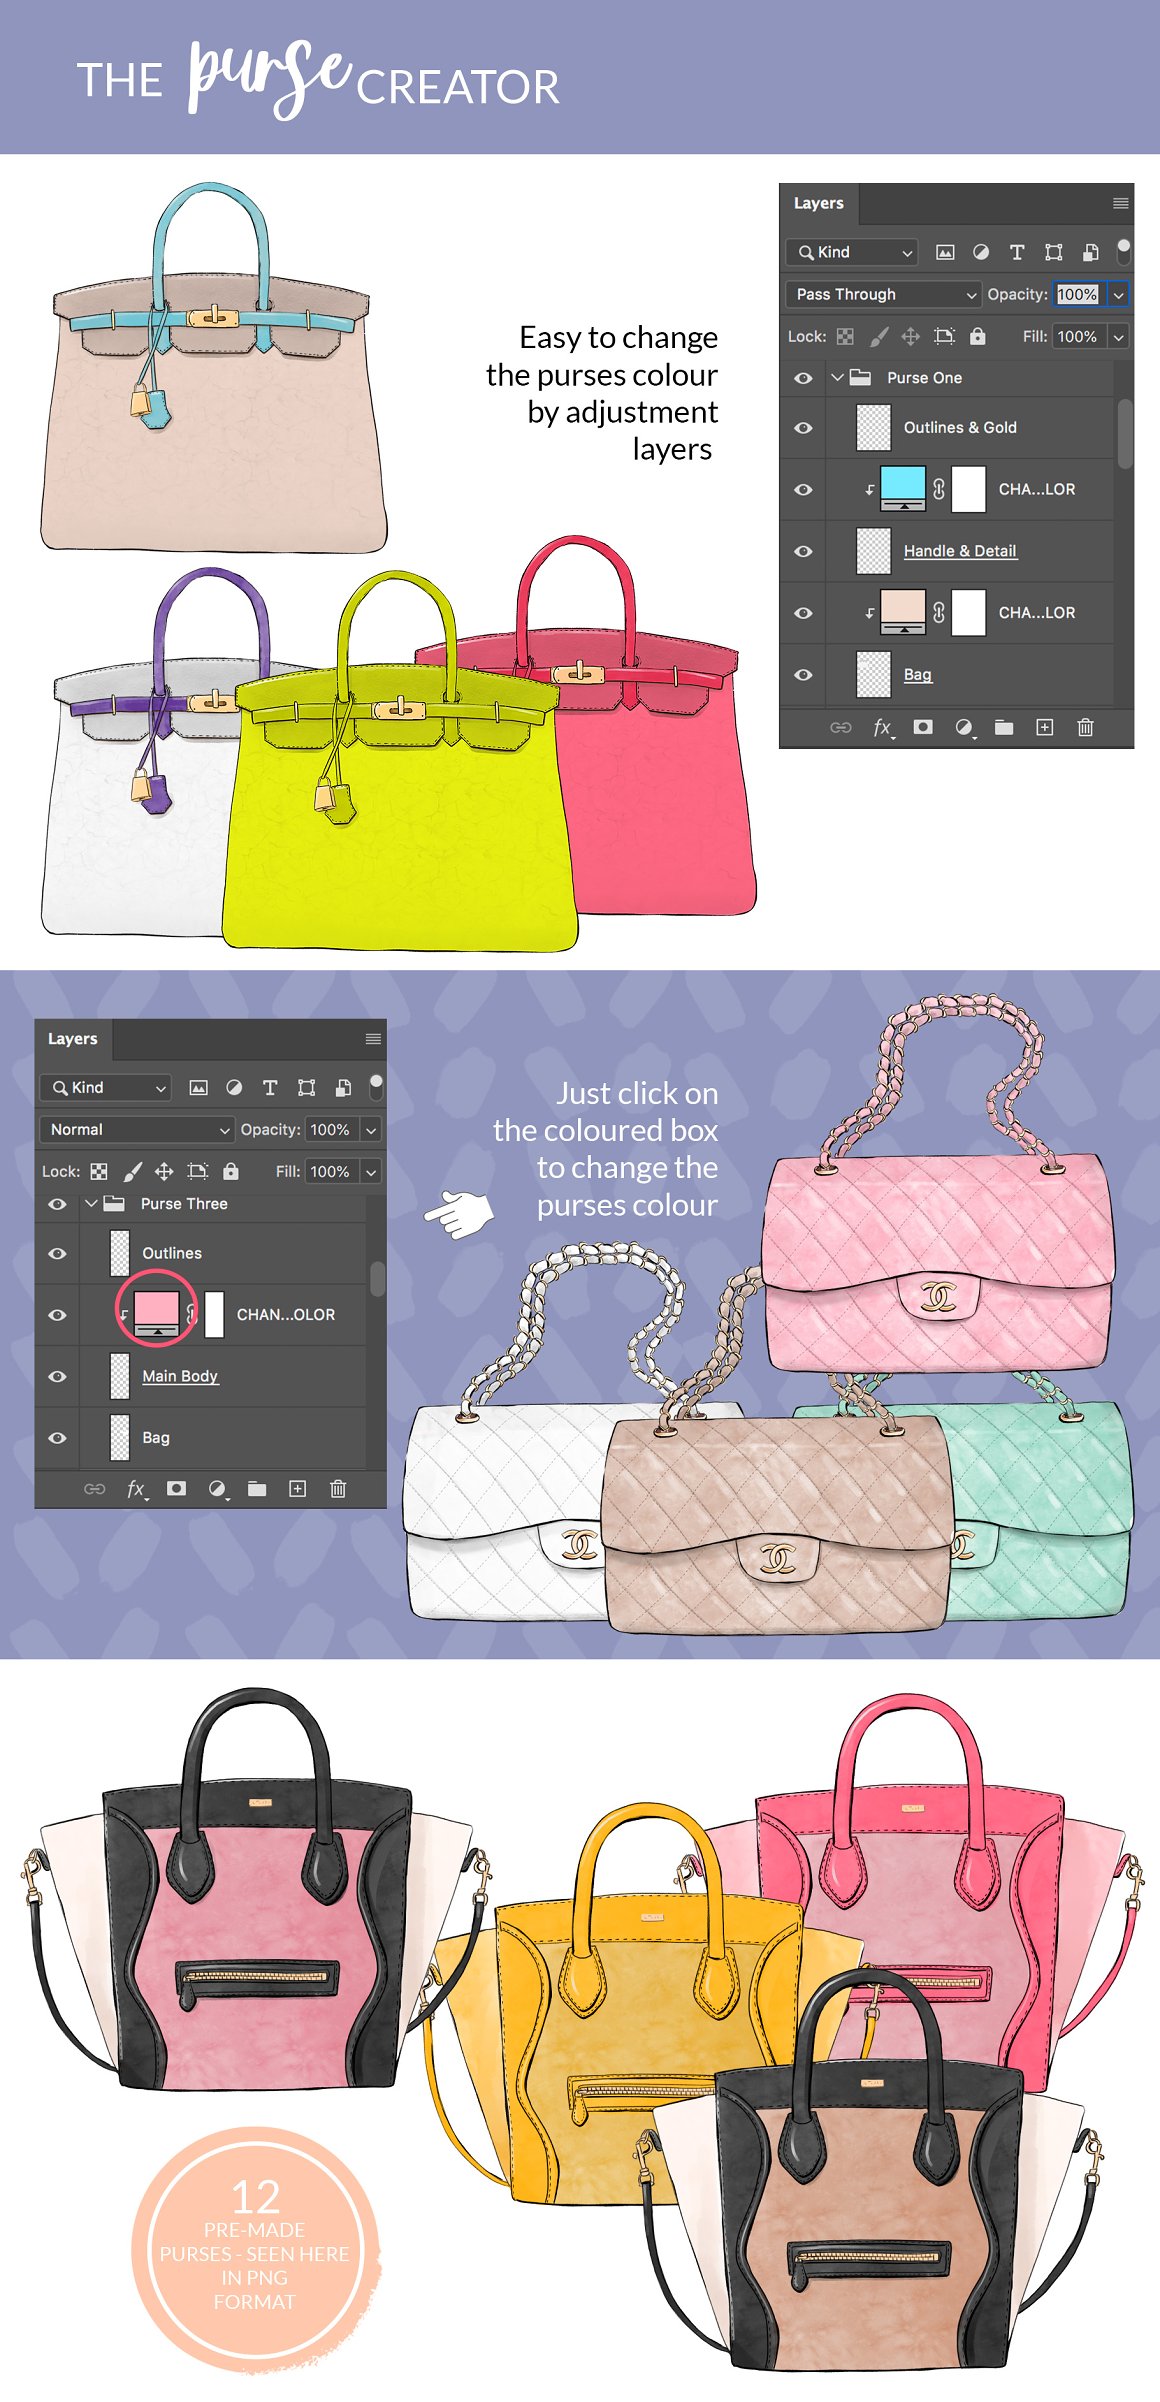 A variety of women's handbags of different types and colors.